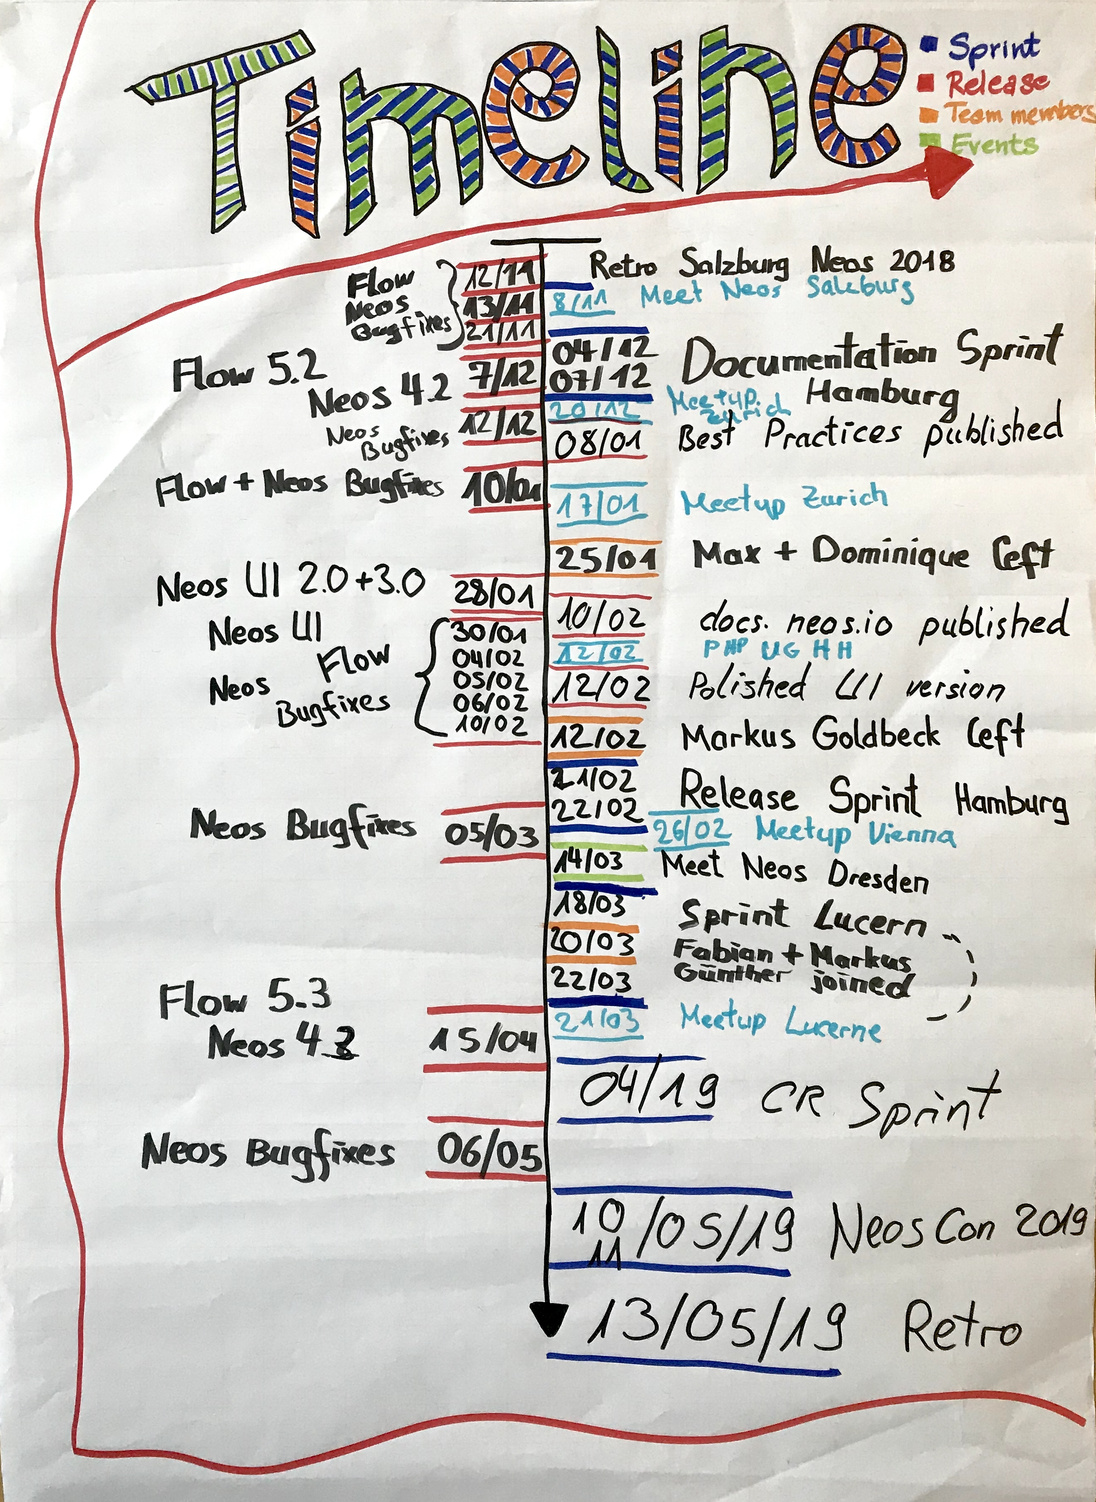 The May 2019 retrospective timeline